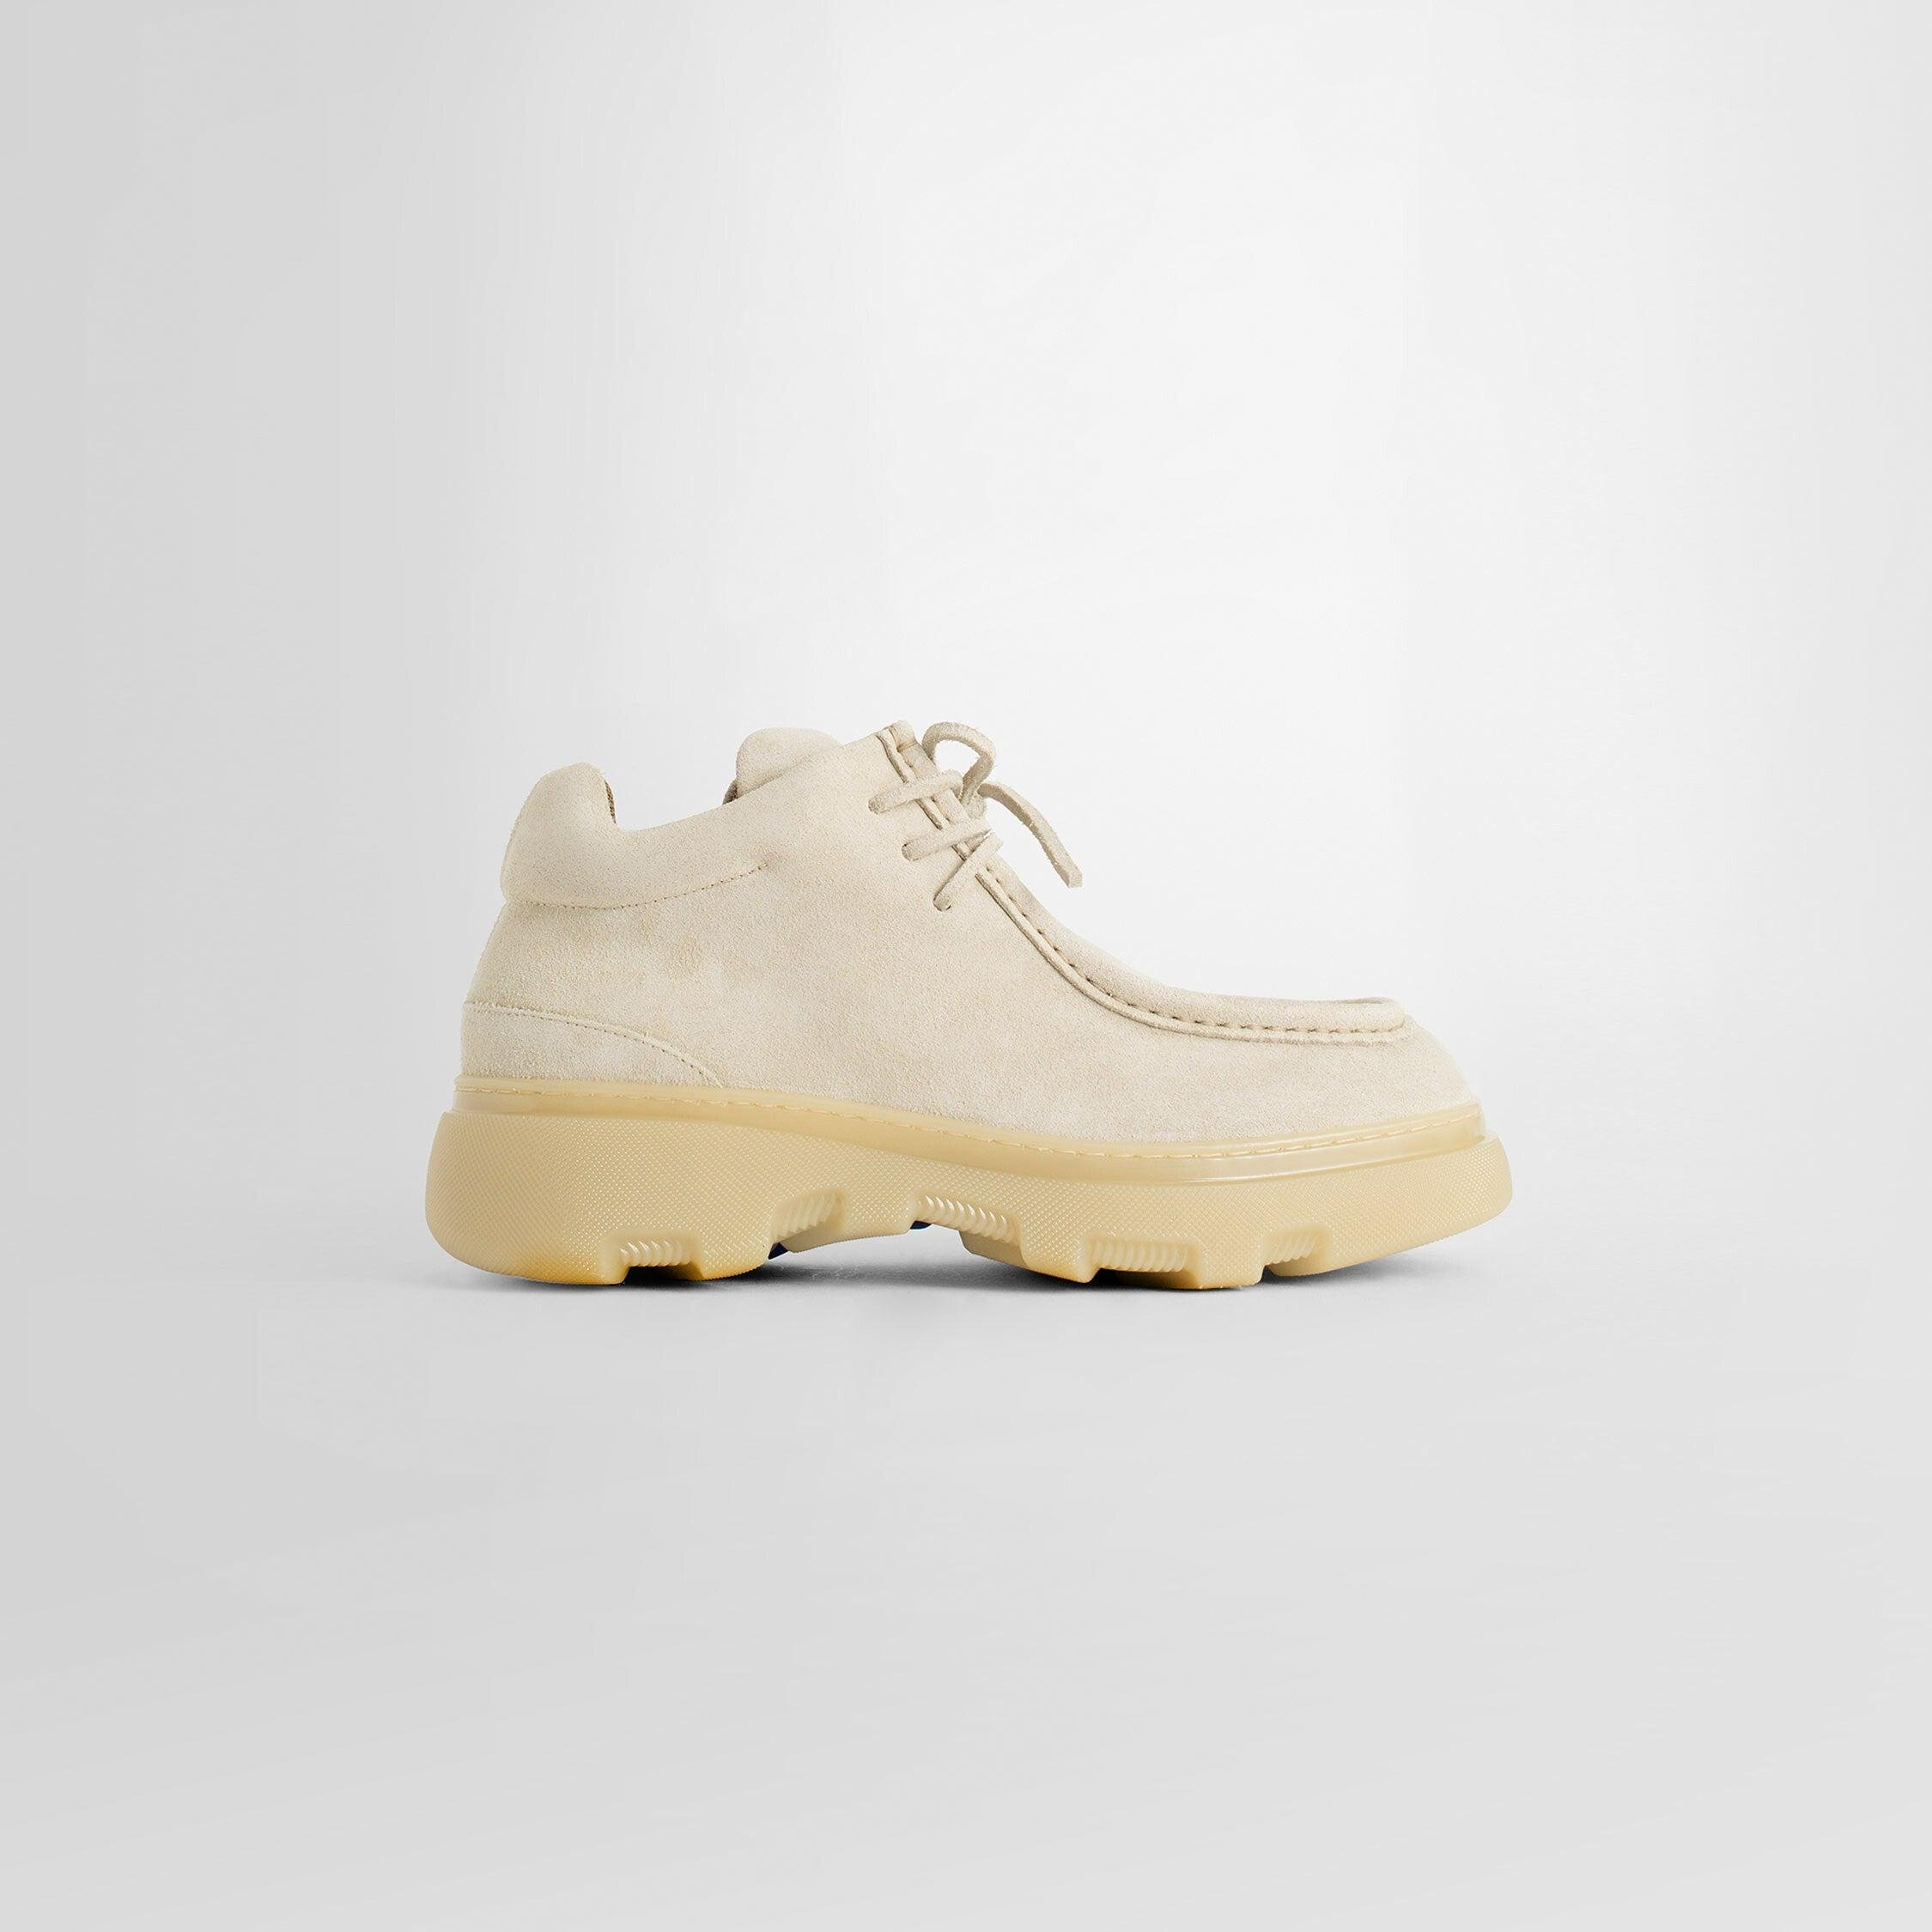 BURBERRY MAN BEIGE LACE-UPS by BURBERRY